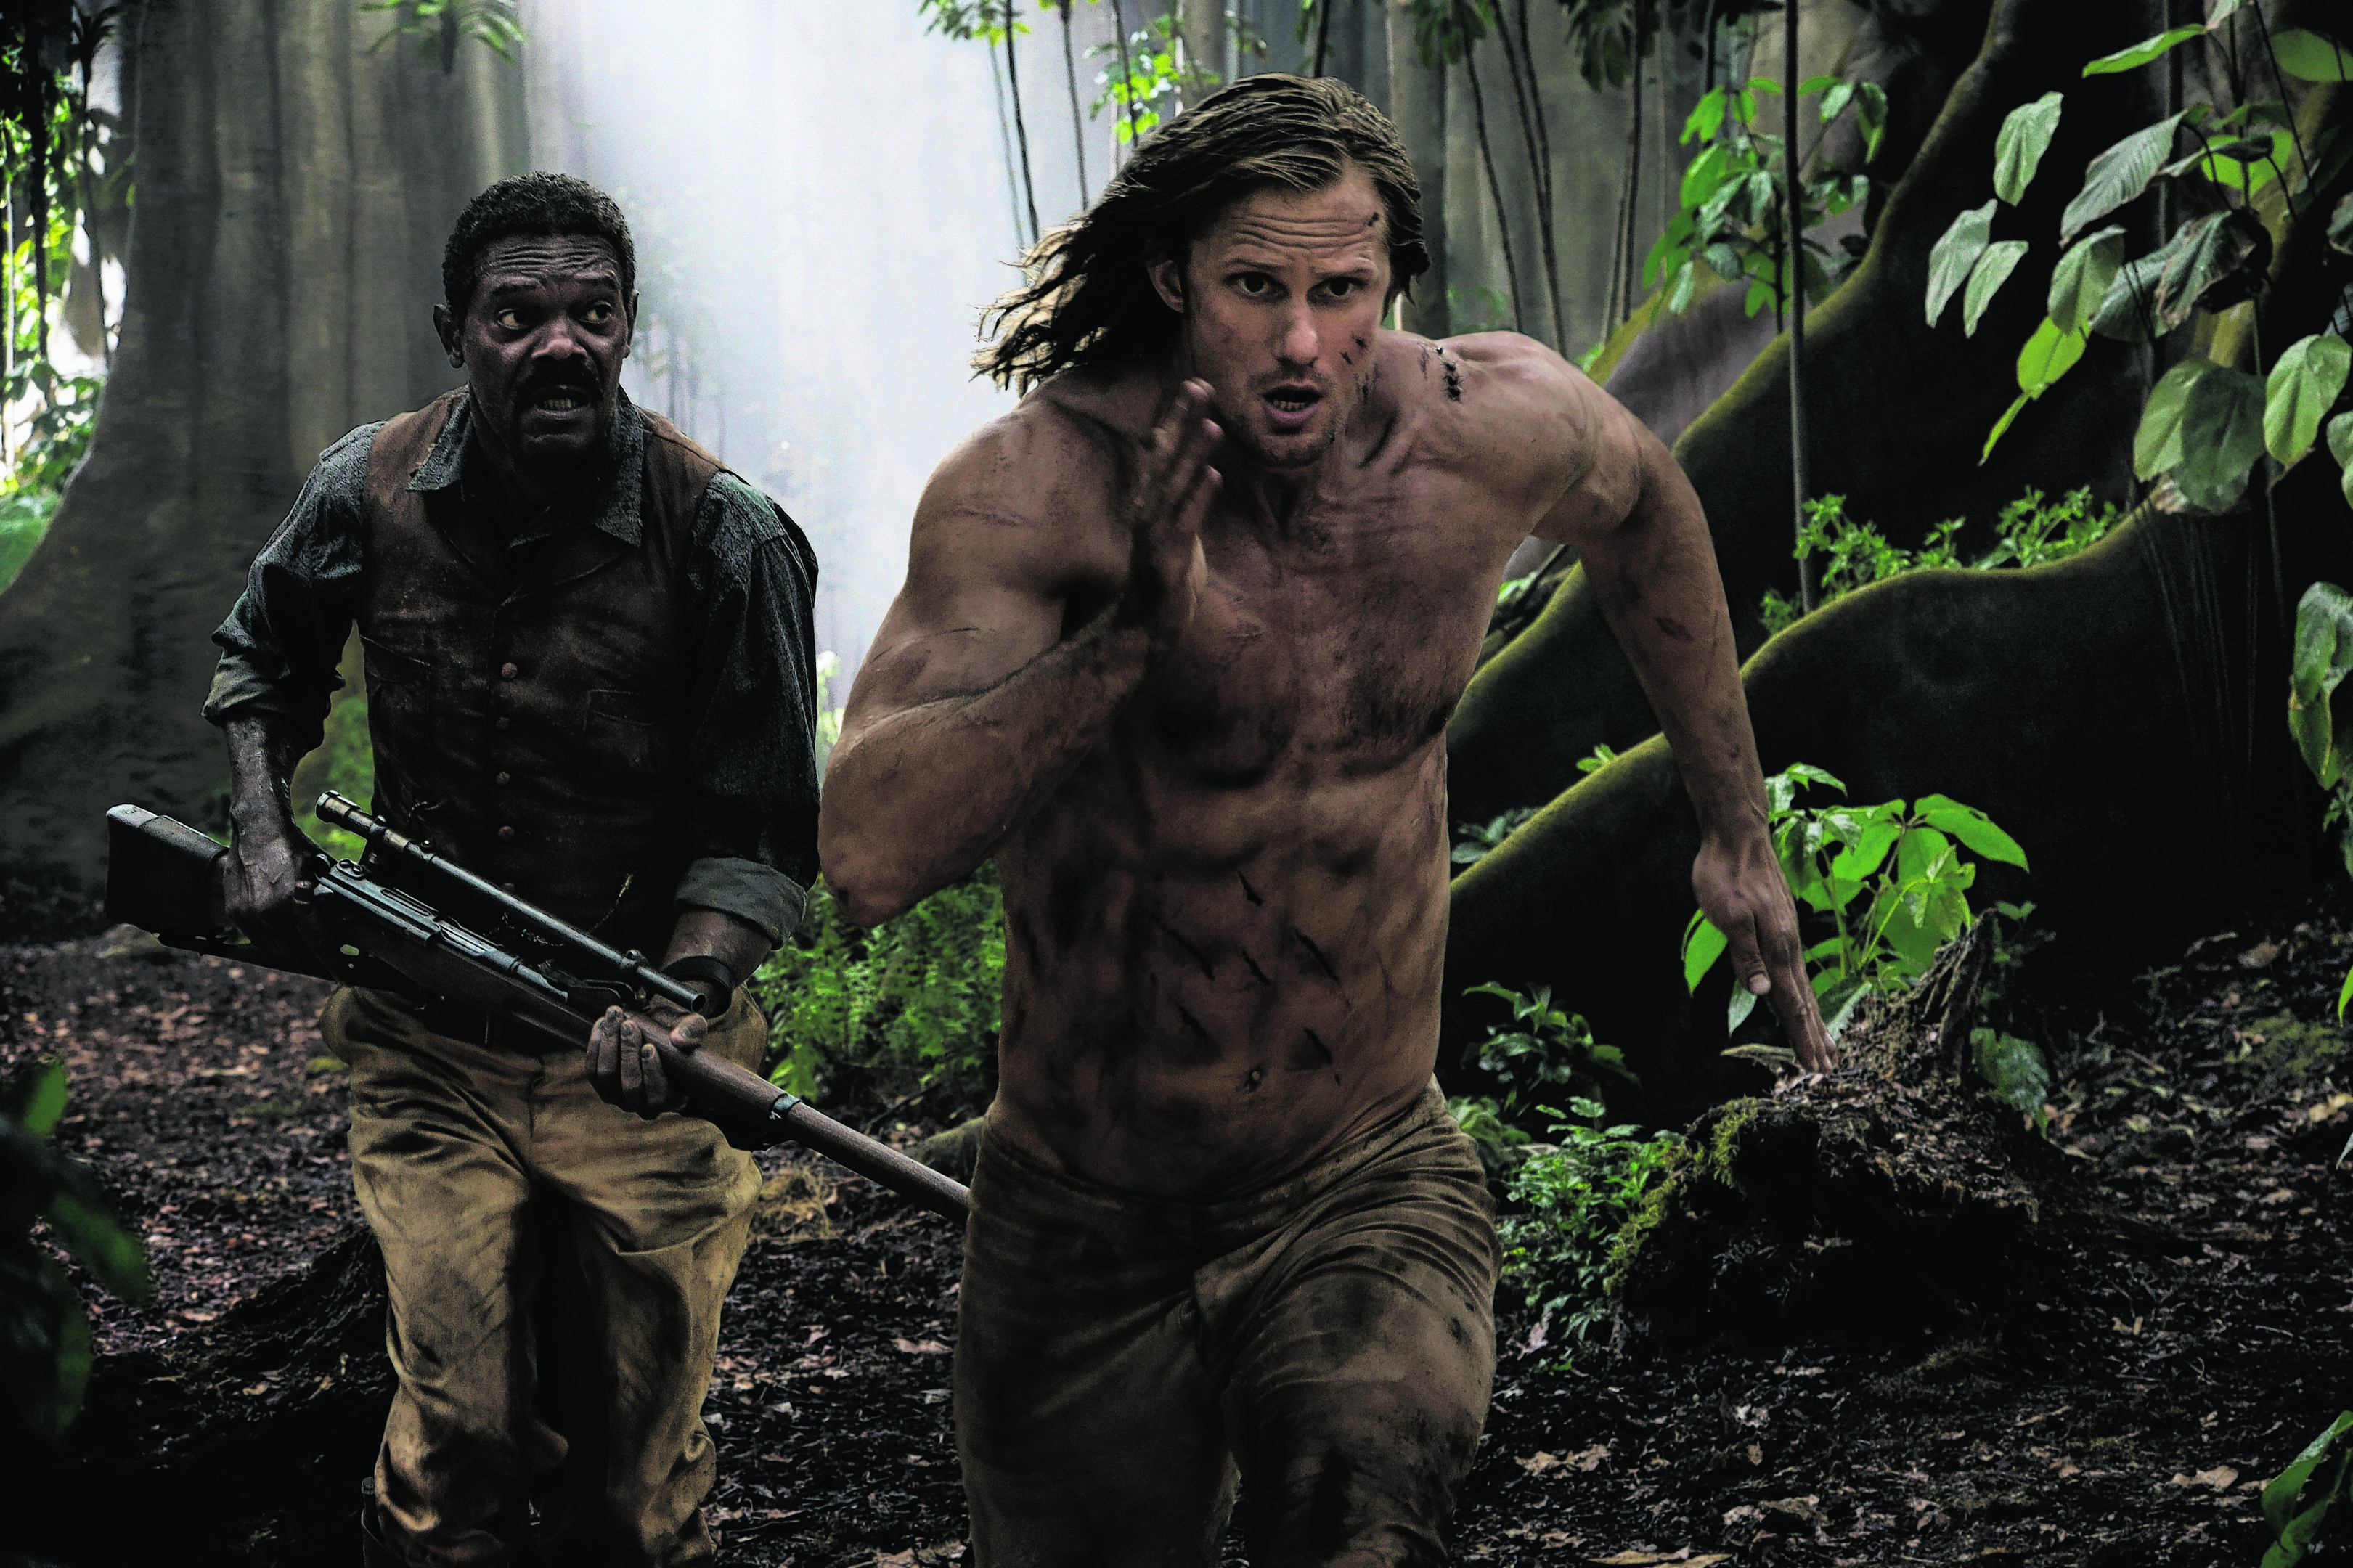 Undated Film Still Handout from The Legend Of Tarzan. Pictured: Samuel L Jackson and Alexander Skarsgard. See PA Feature FILM Reviews. Picture credit should read: PA Photo/Warner Brothers. WARNING: This picture must only be used to accompany PA Feature FILM Reviews.